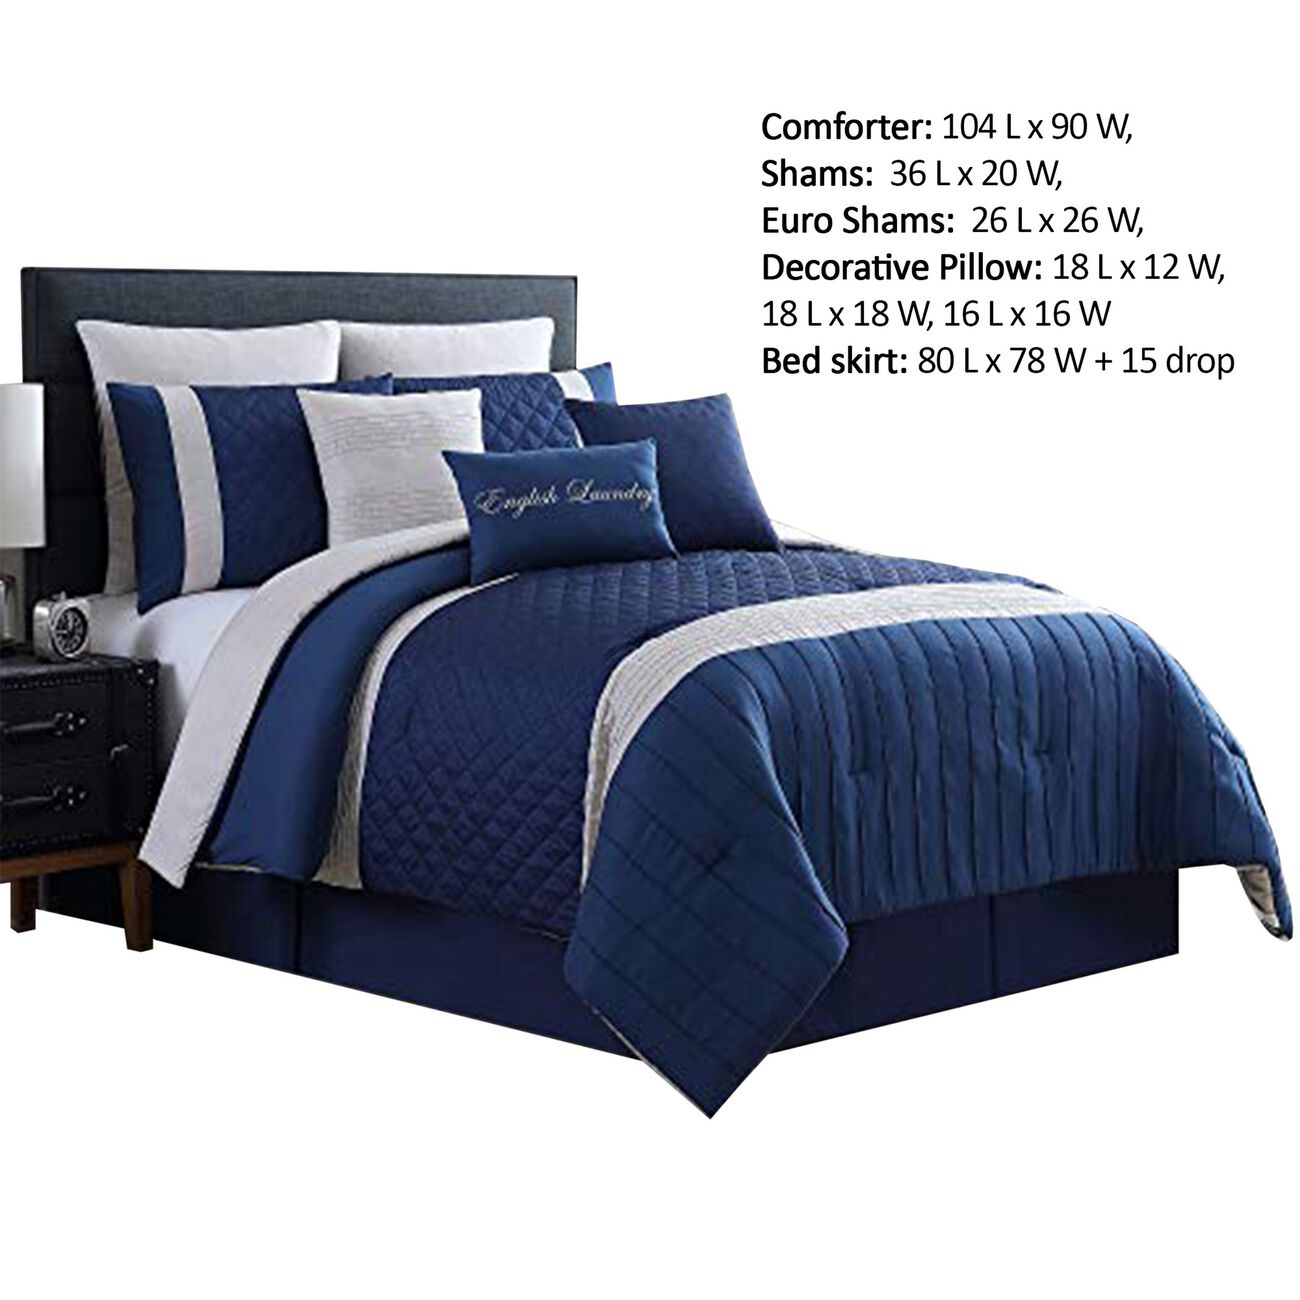 Basel Pleated King Comforter Set with Diamond Pattern The Urban Port, Blue and White